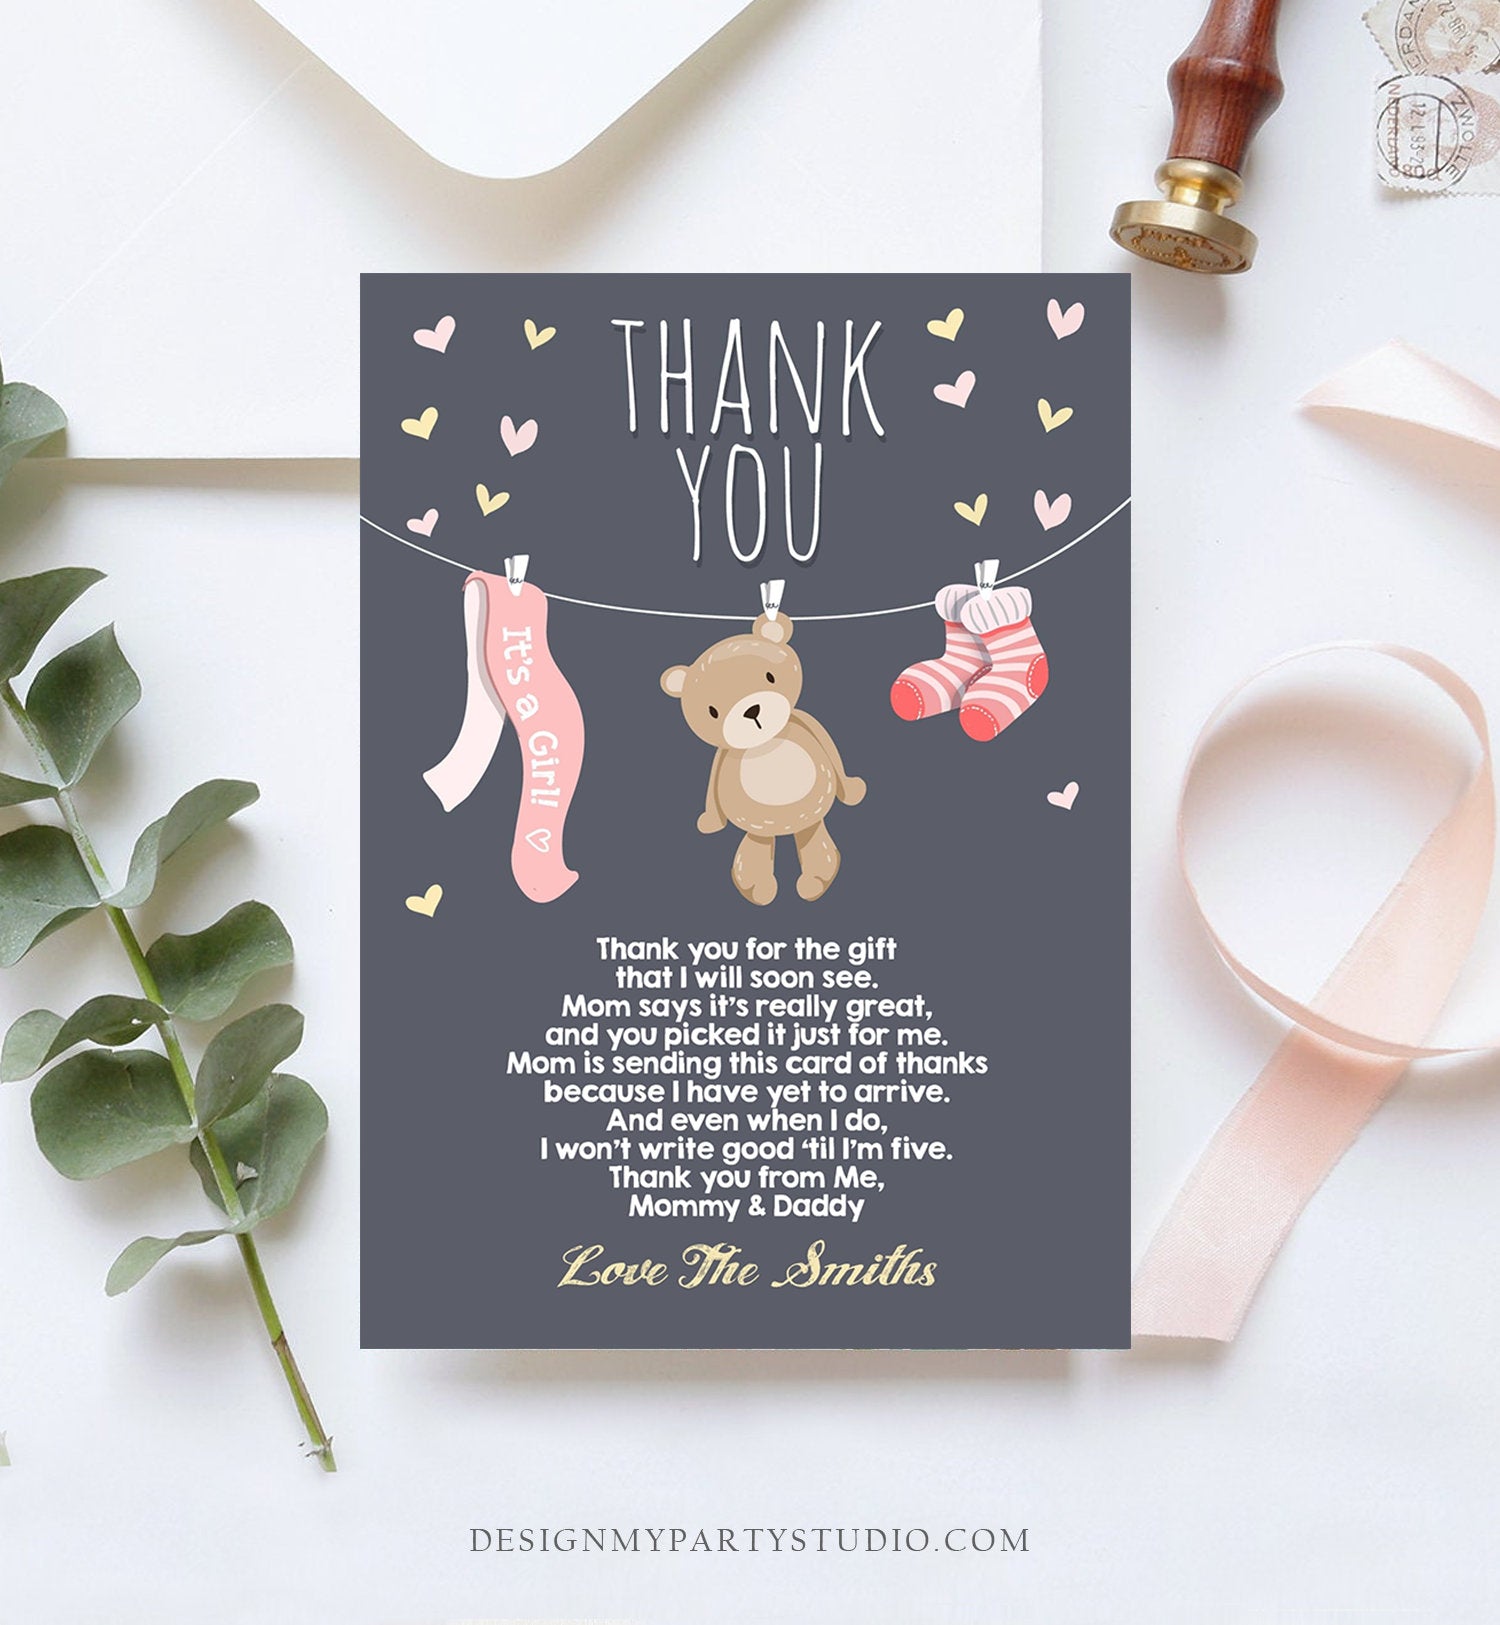 Taxpayer Hummingbird Faktura Editable Baby Shower Thank You Card Teddy Bear Thank You Note Shower P -  Design My Party Studio